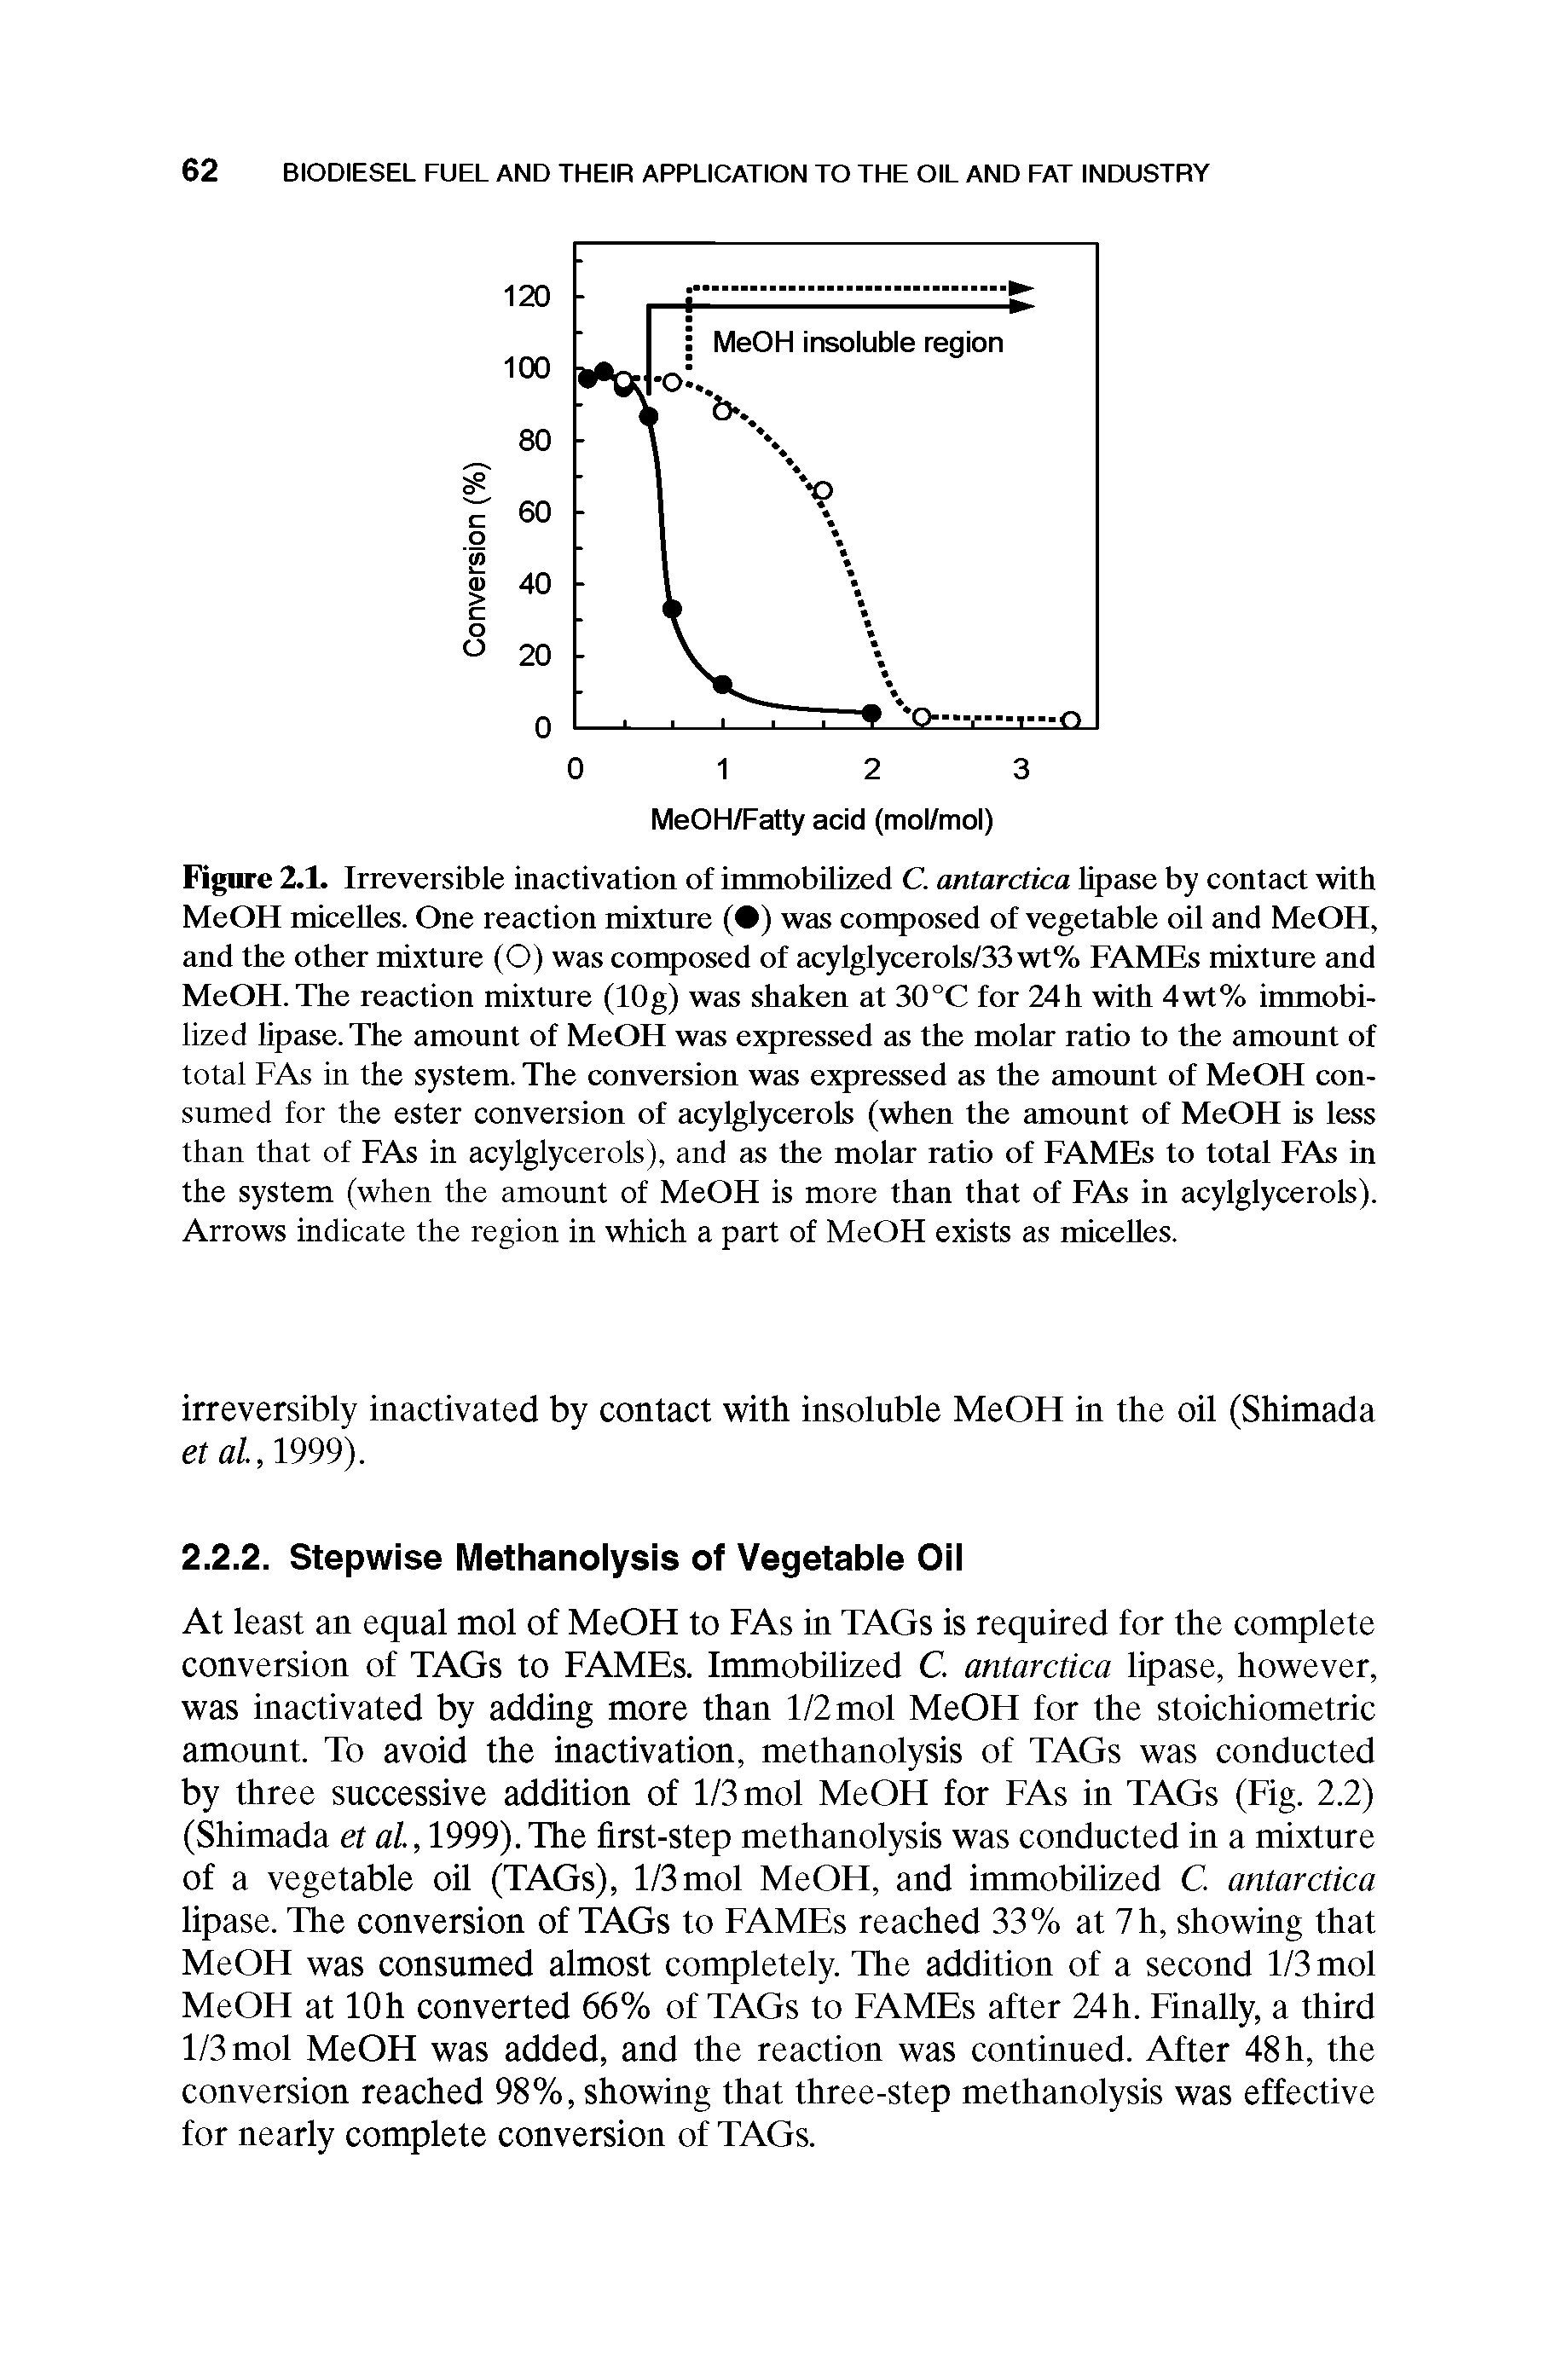 Figure 2.1. Irreversible inactivation of immobilized C. antarctica lipase by contact with MeOH micelles. One reaction mixture ( ) was composed of vegetable oil and MeOH, and the other mixture (O) was composed of acylglycerols/33wt% FAMEs mixture and MeOH. The reaction mixture (10 g) was shaken at 30 °C for 24 h with 4wt% immobilized lipase. The amount of MeOH was expressed as the molar ratio to the amount of total FAs in the system. The conversion was expressed as the amount of MeOH consumed for the ester conversion of acylglycerols (when the amount of MeOH is less than that of FAs in acylglycerols), and as the molar ratio of FAMEs to total FAs in the system (when the amount of MeOH is more than that of FAs in acylglycerols). Arrows indicate the region in which a part of MeOH exists as micelles.